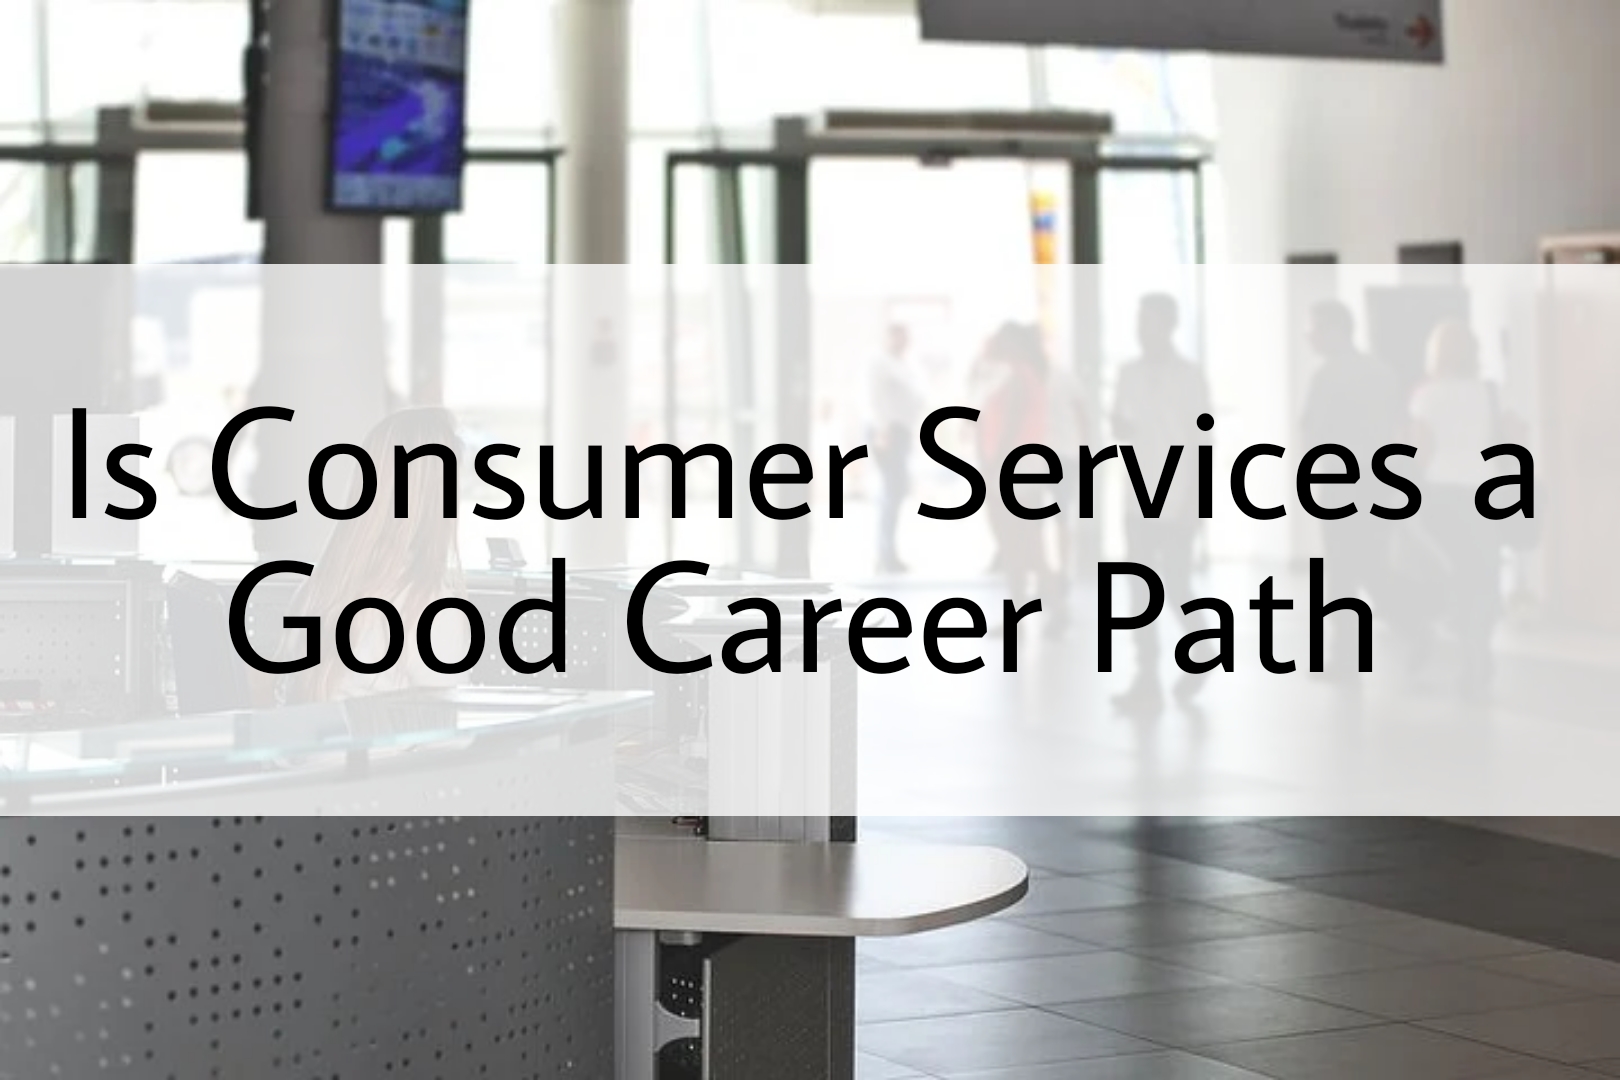 is Consumer Services a Good Career Path